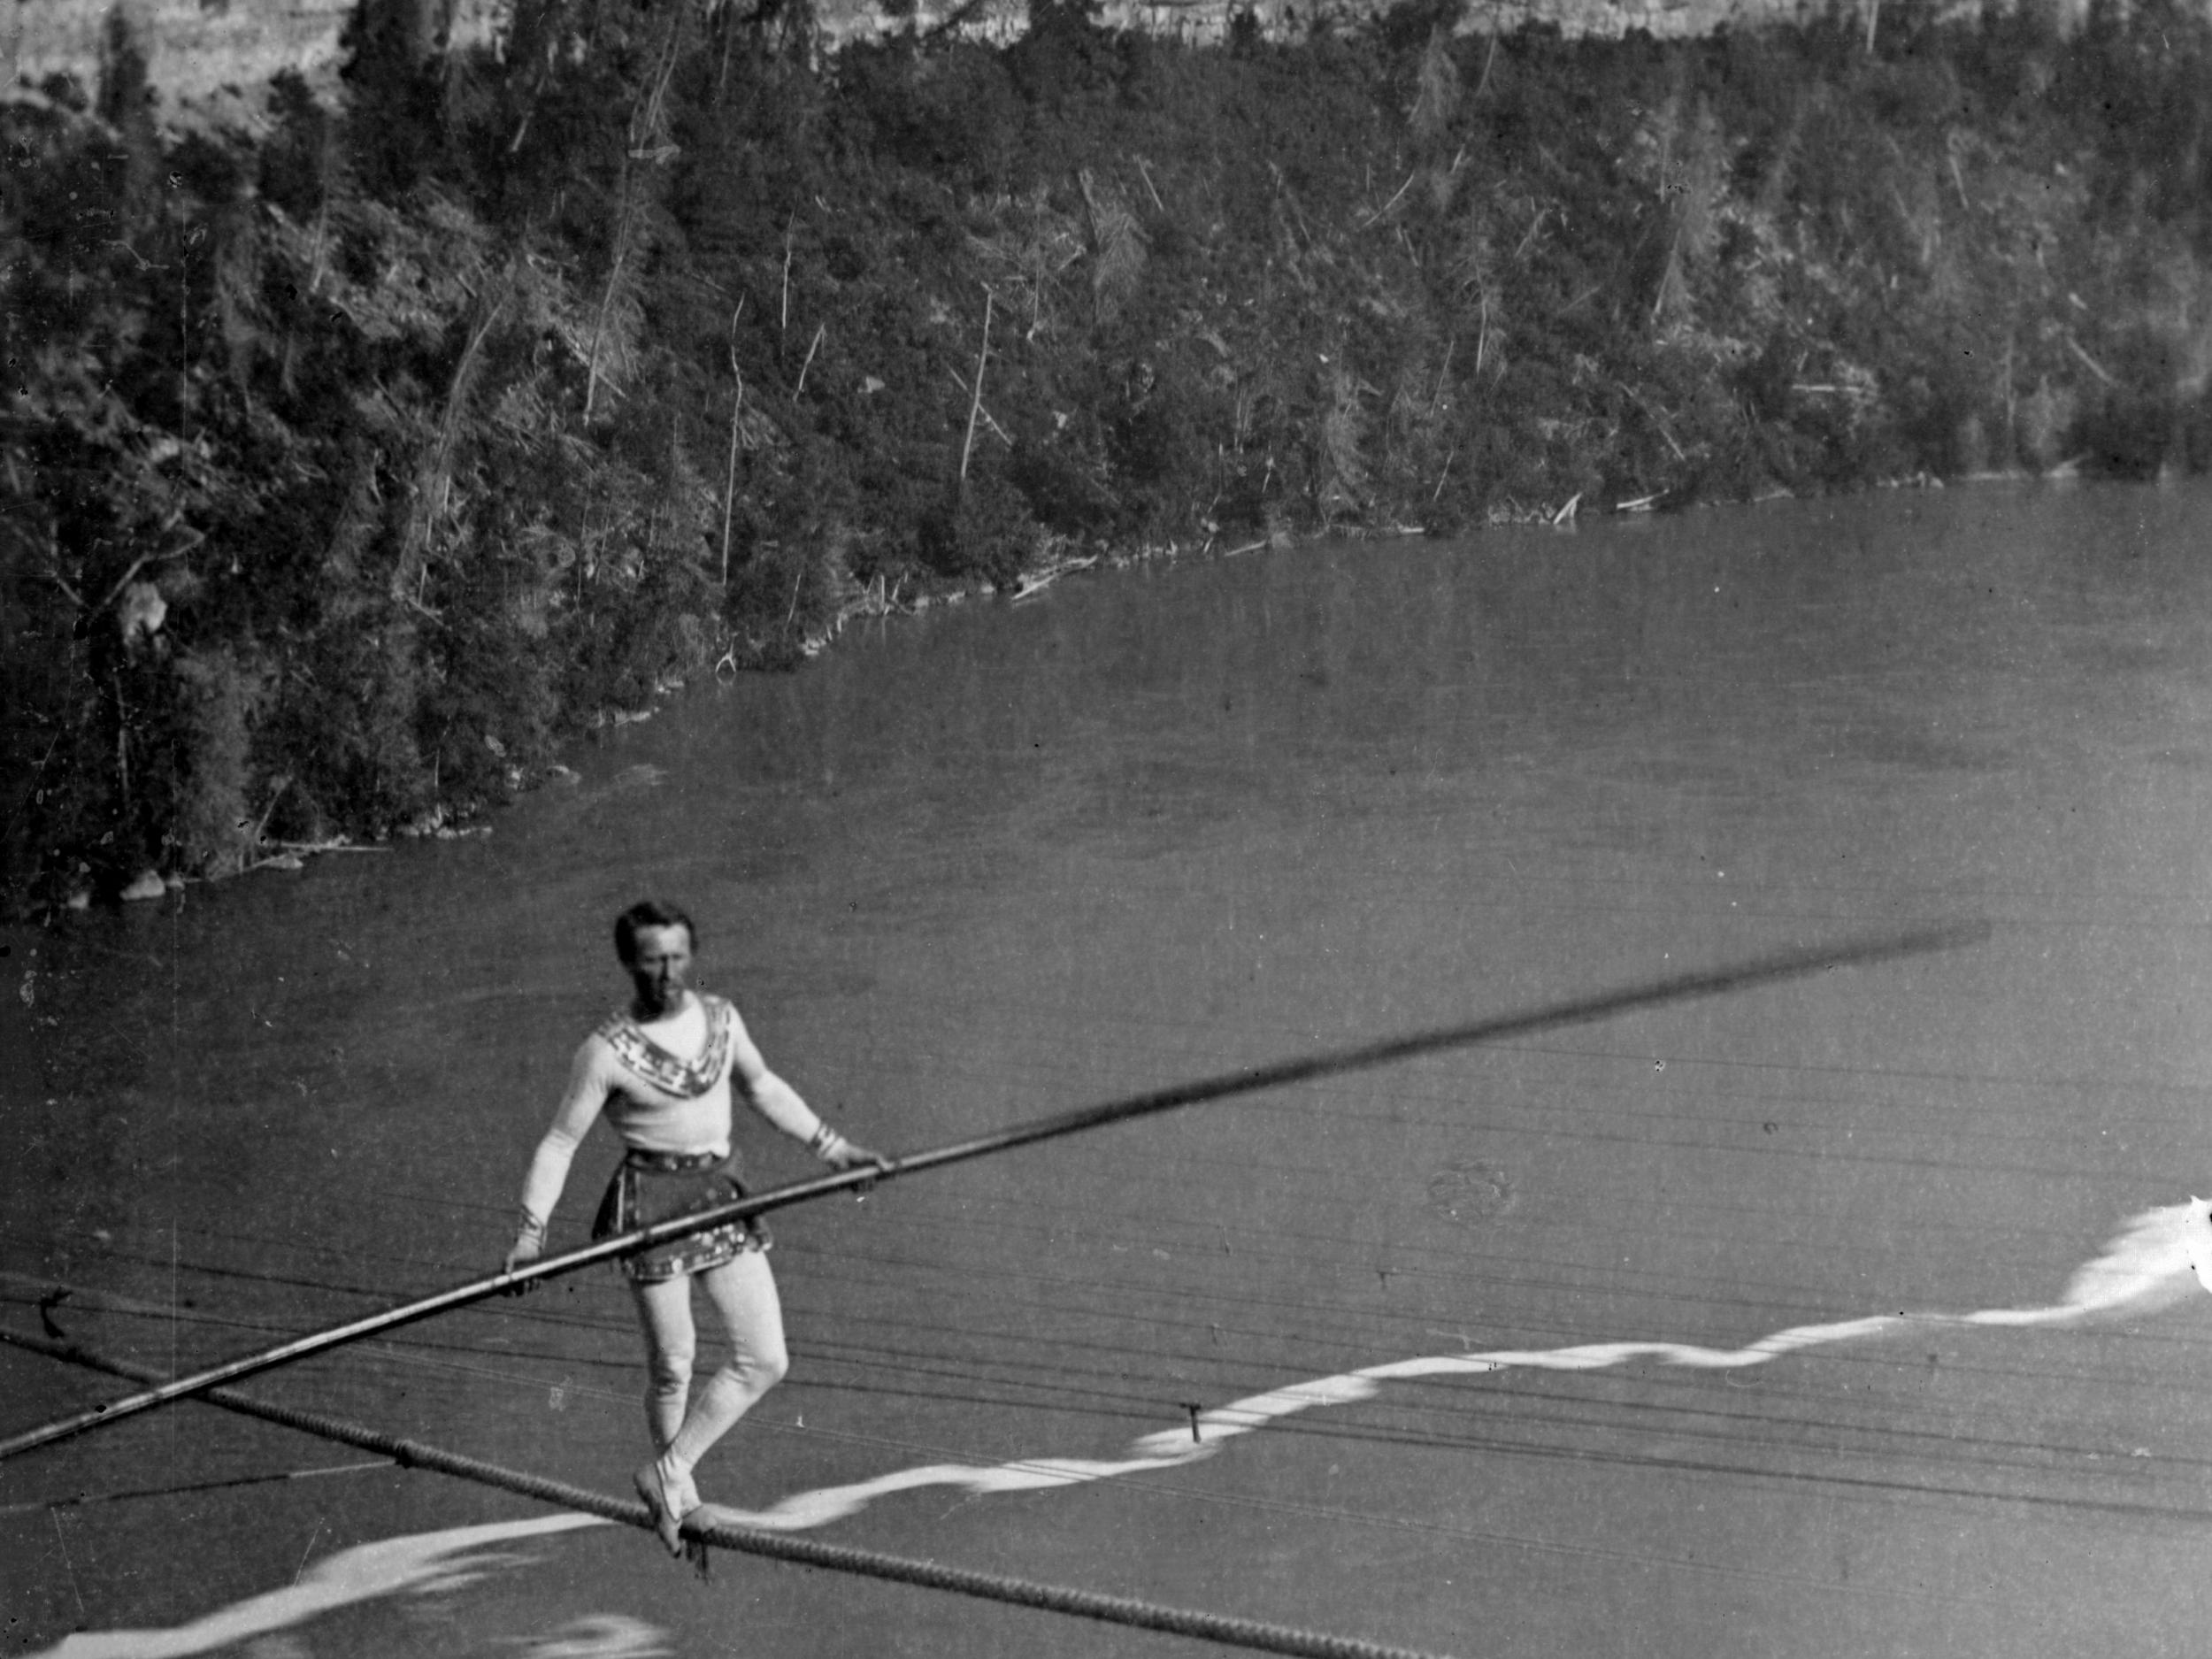 Charles Blondin crossed Niagara Falls on a tightrope on 30 June 1959 (Getty)